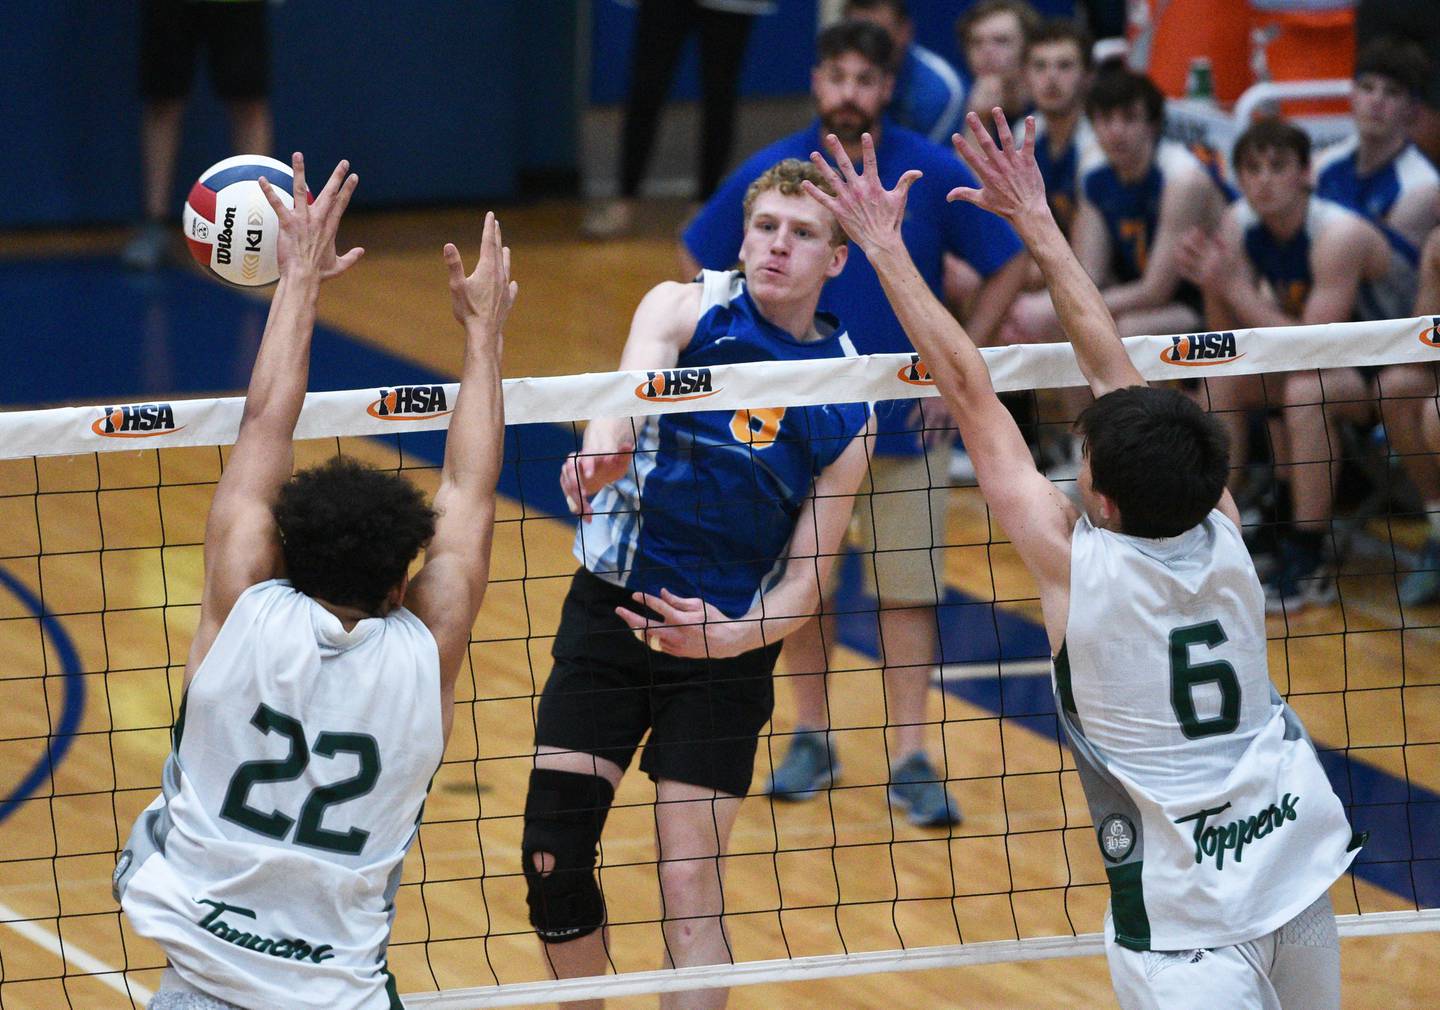 Lyons Township's Sam Levinson, center, hits past the Glenbard West defens during Saturday’s state boys volleyball championship  match in Hoffman Estates.